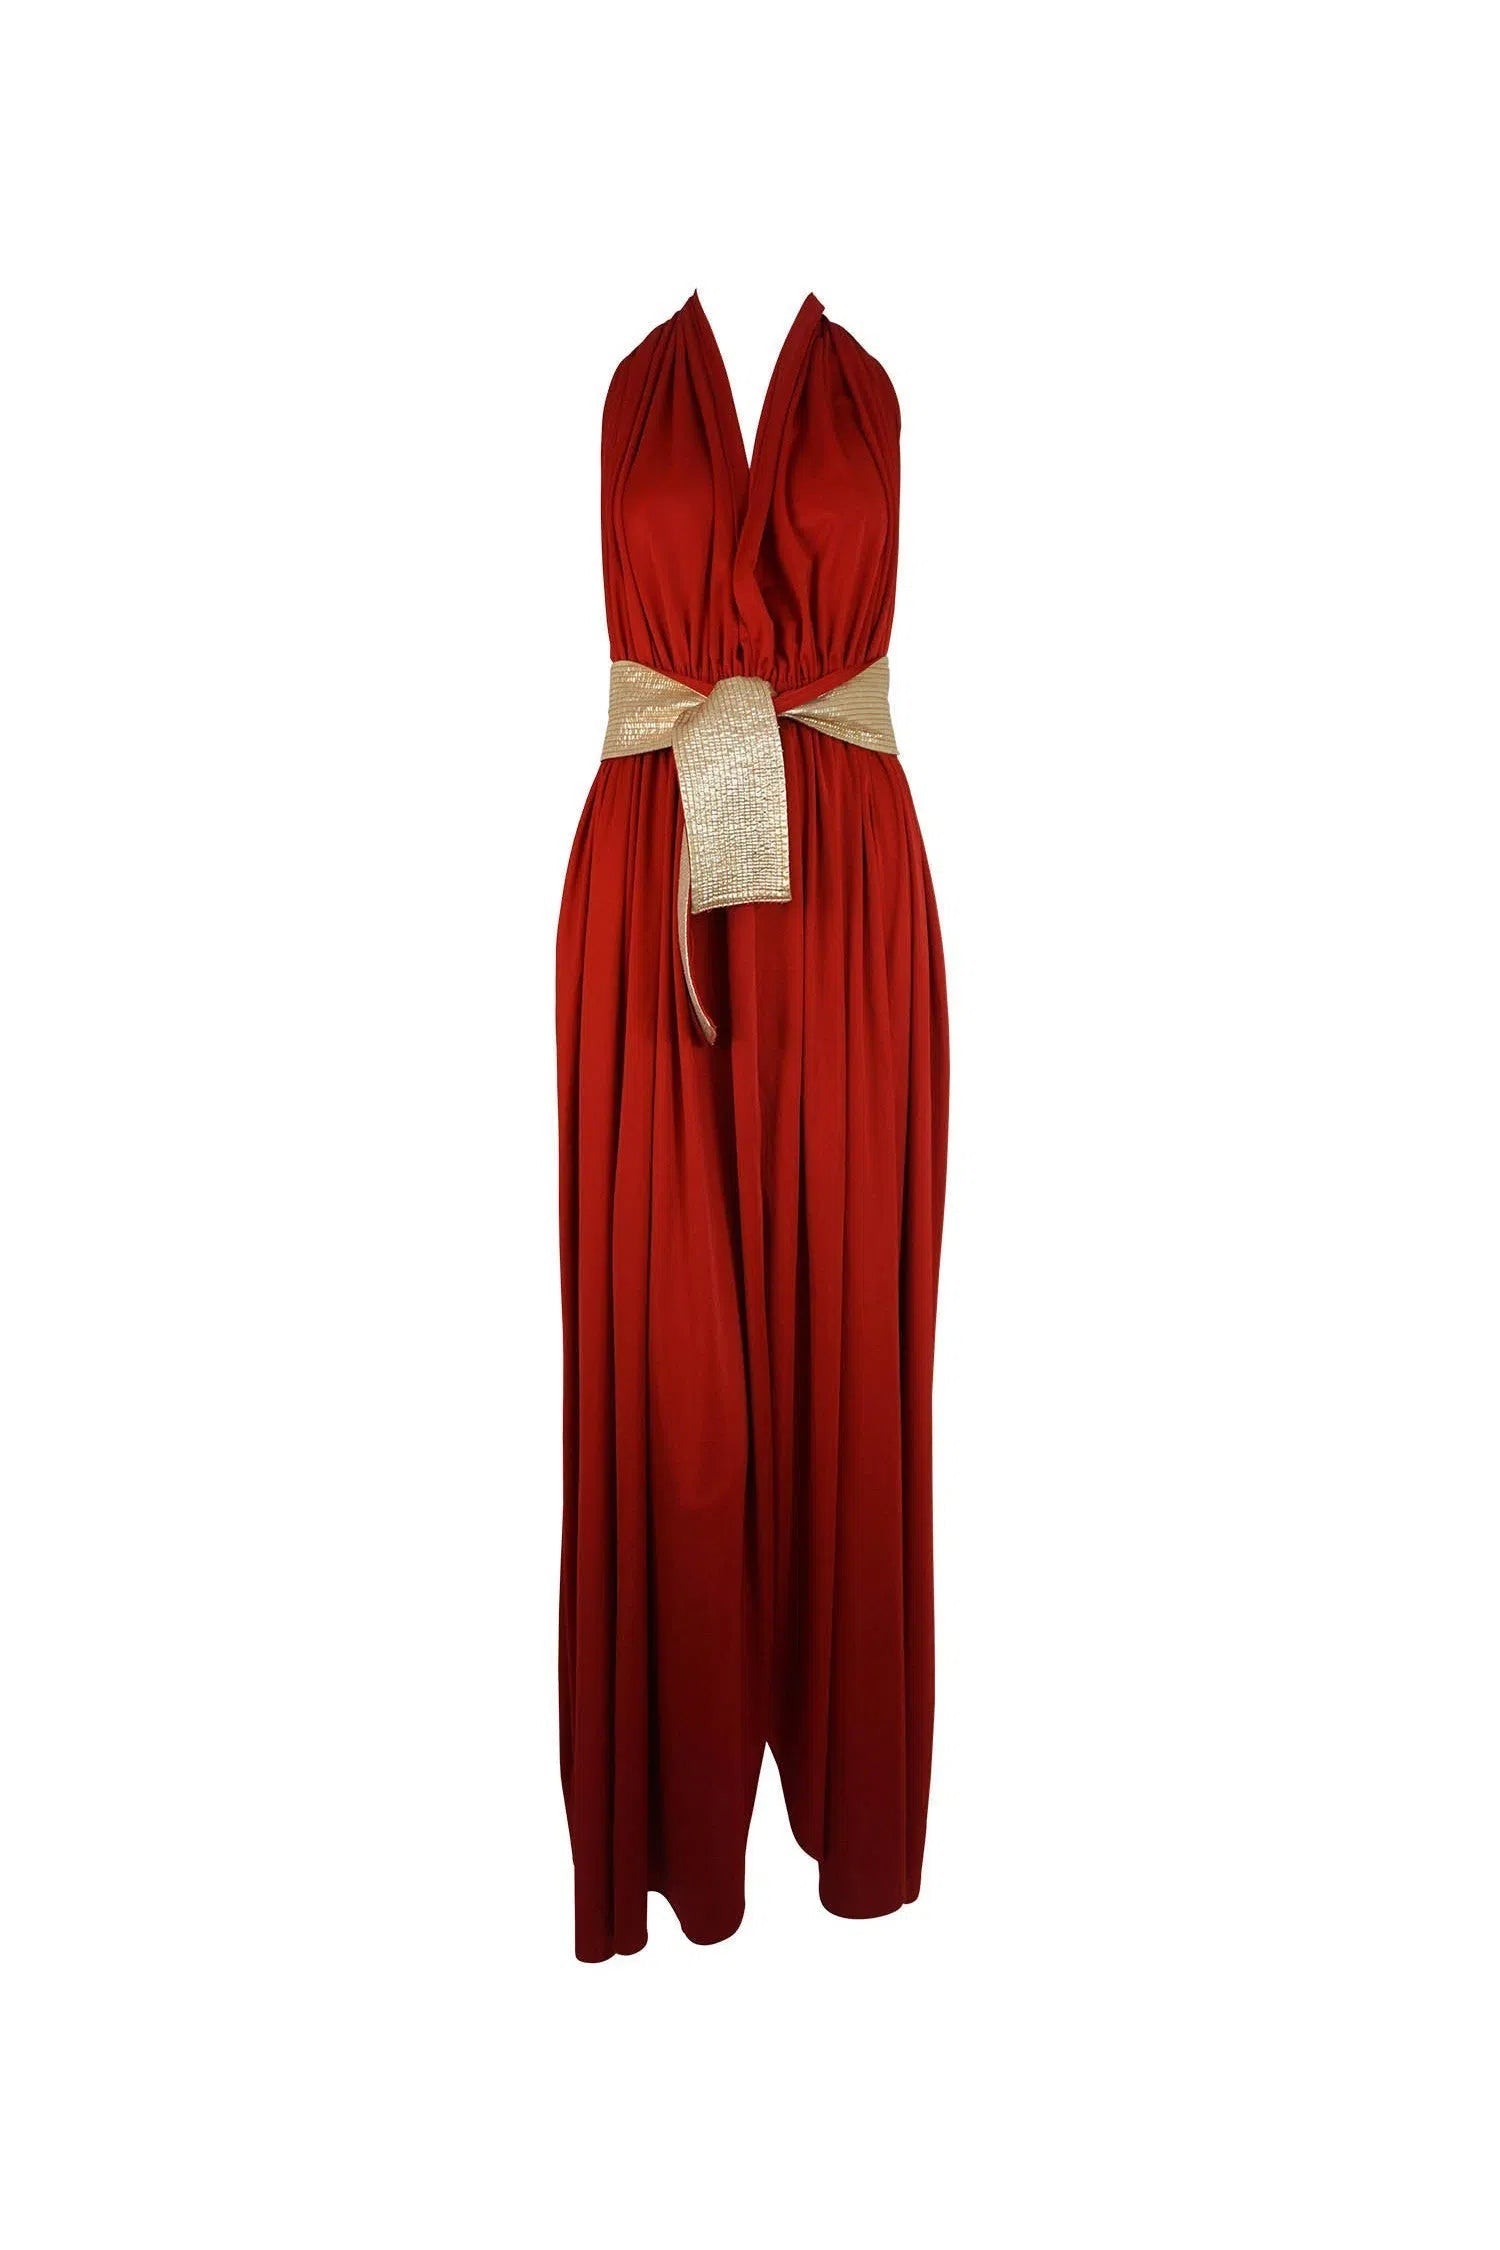 Bill Tice Red Jersey Gown Vintage 1970s - Foxy Couture Carmel